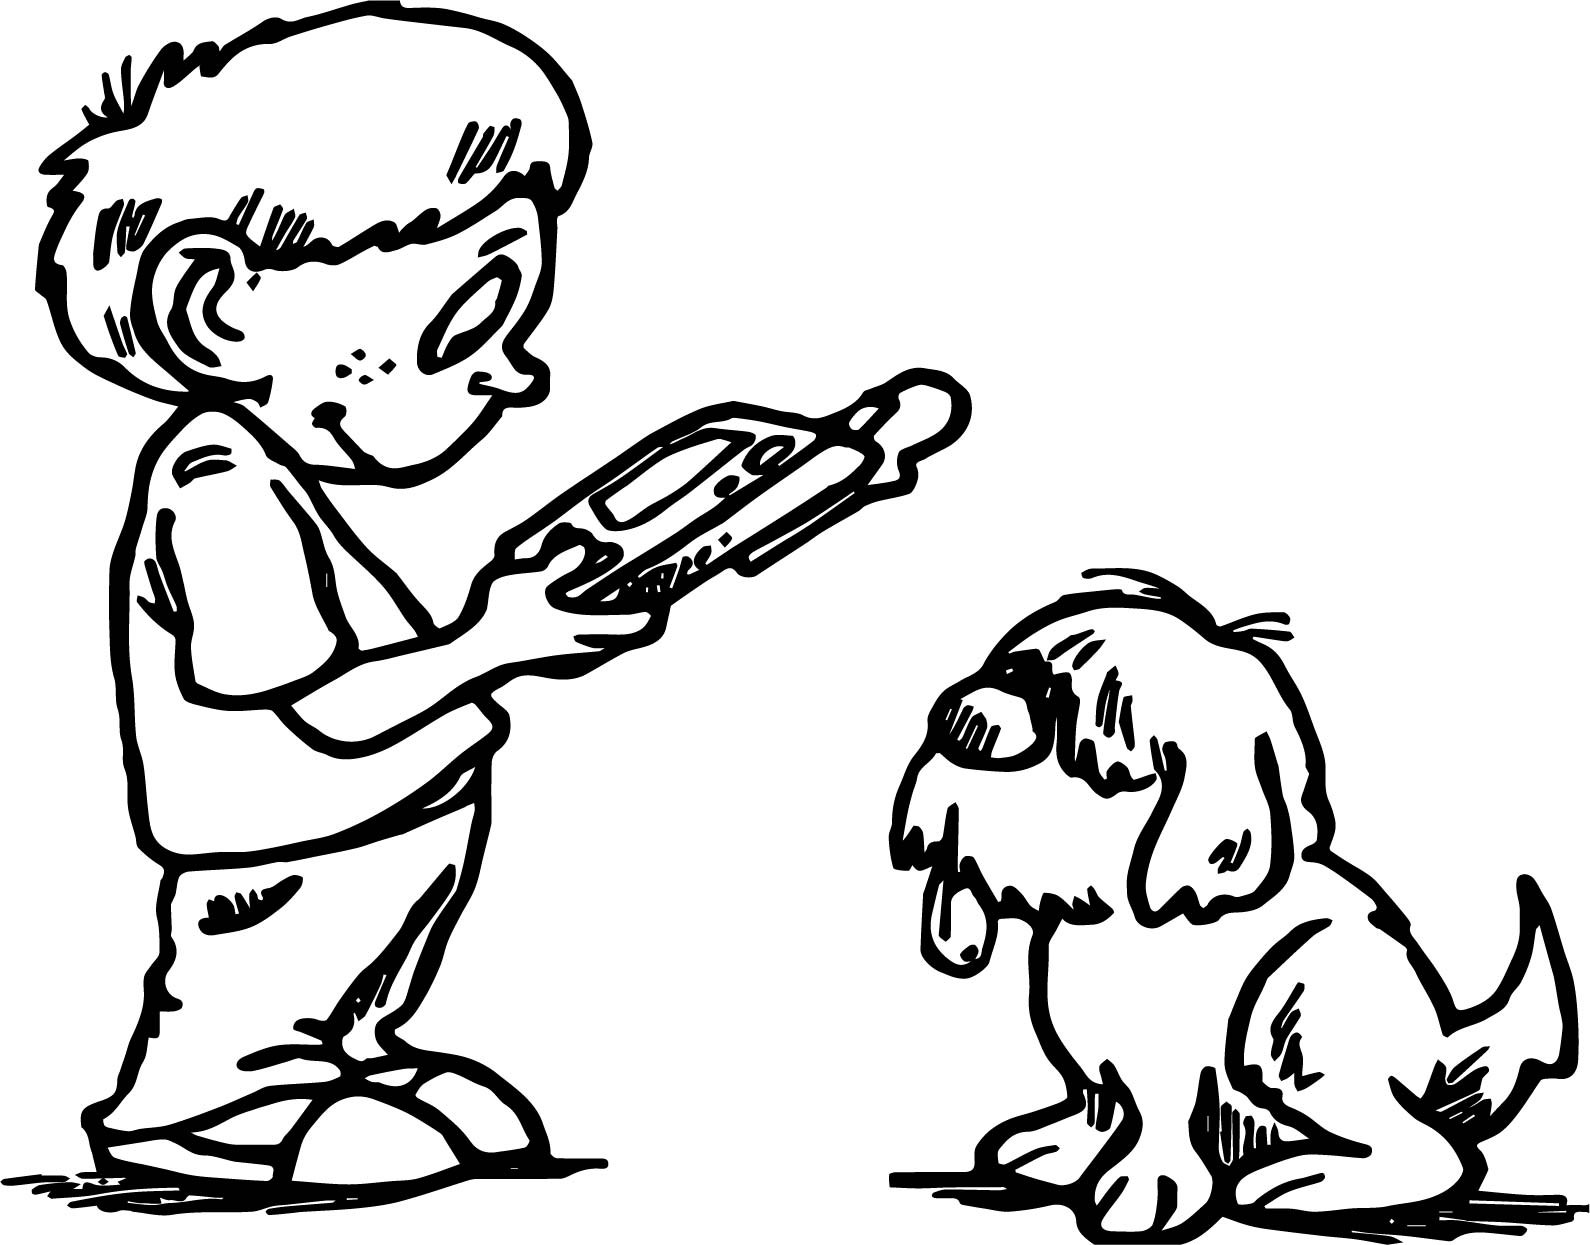 Coloring Book Games For Boys
 Boy Playing puter Games With Dog Coloring Page